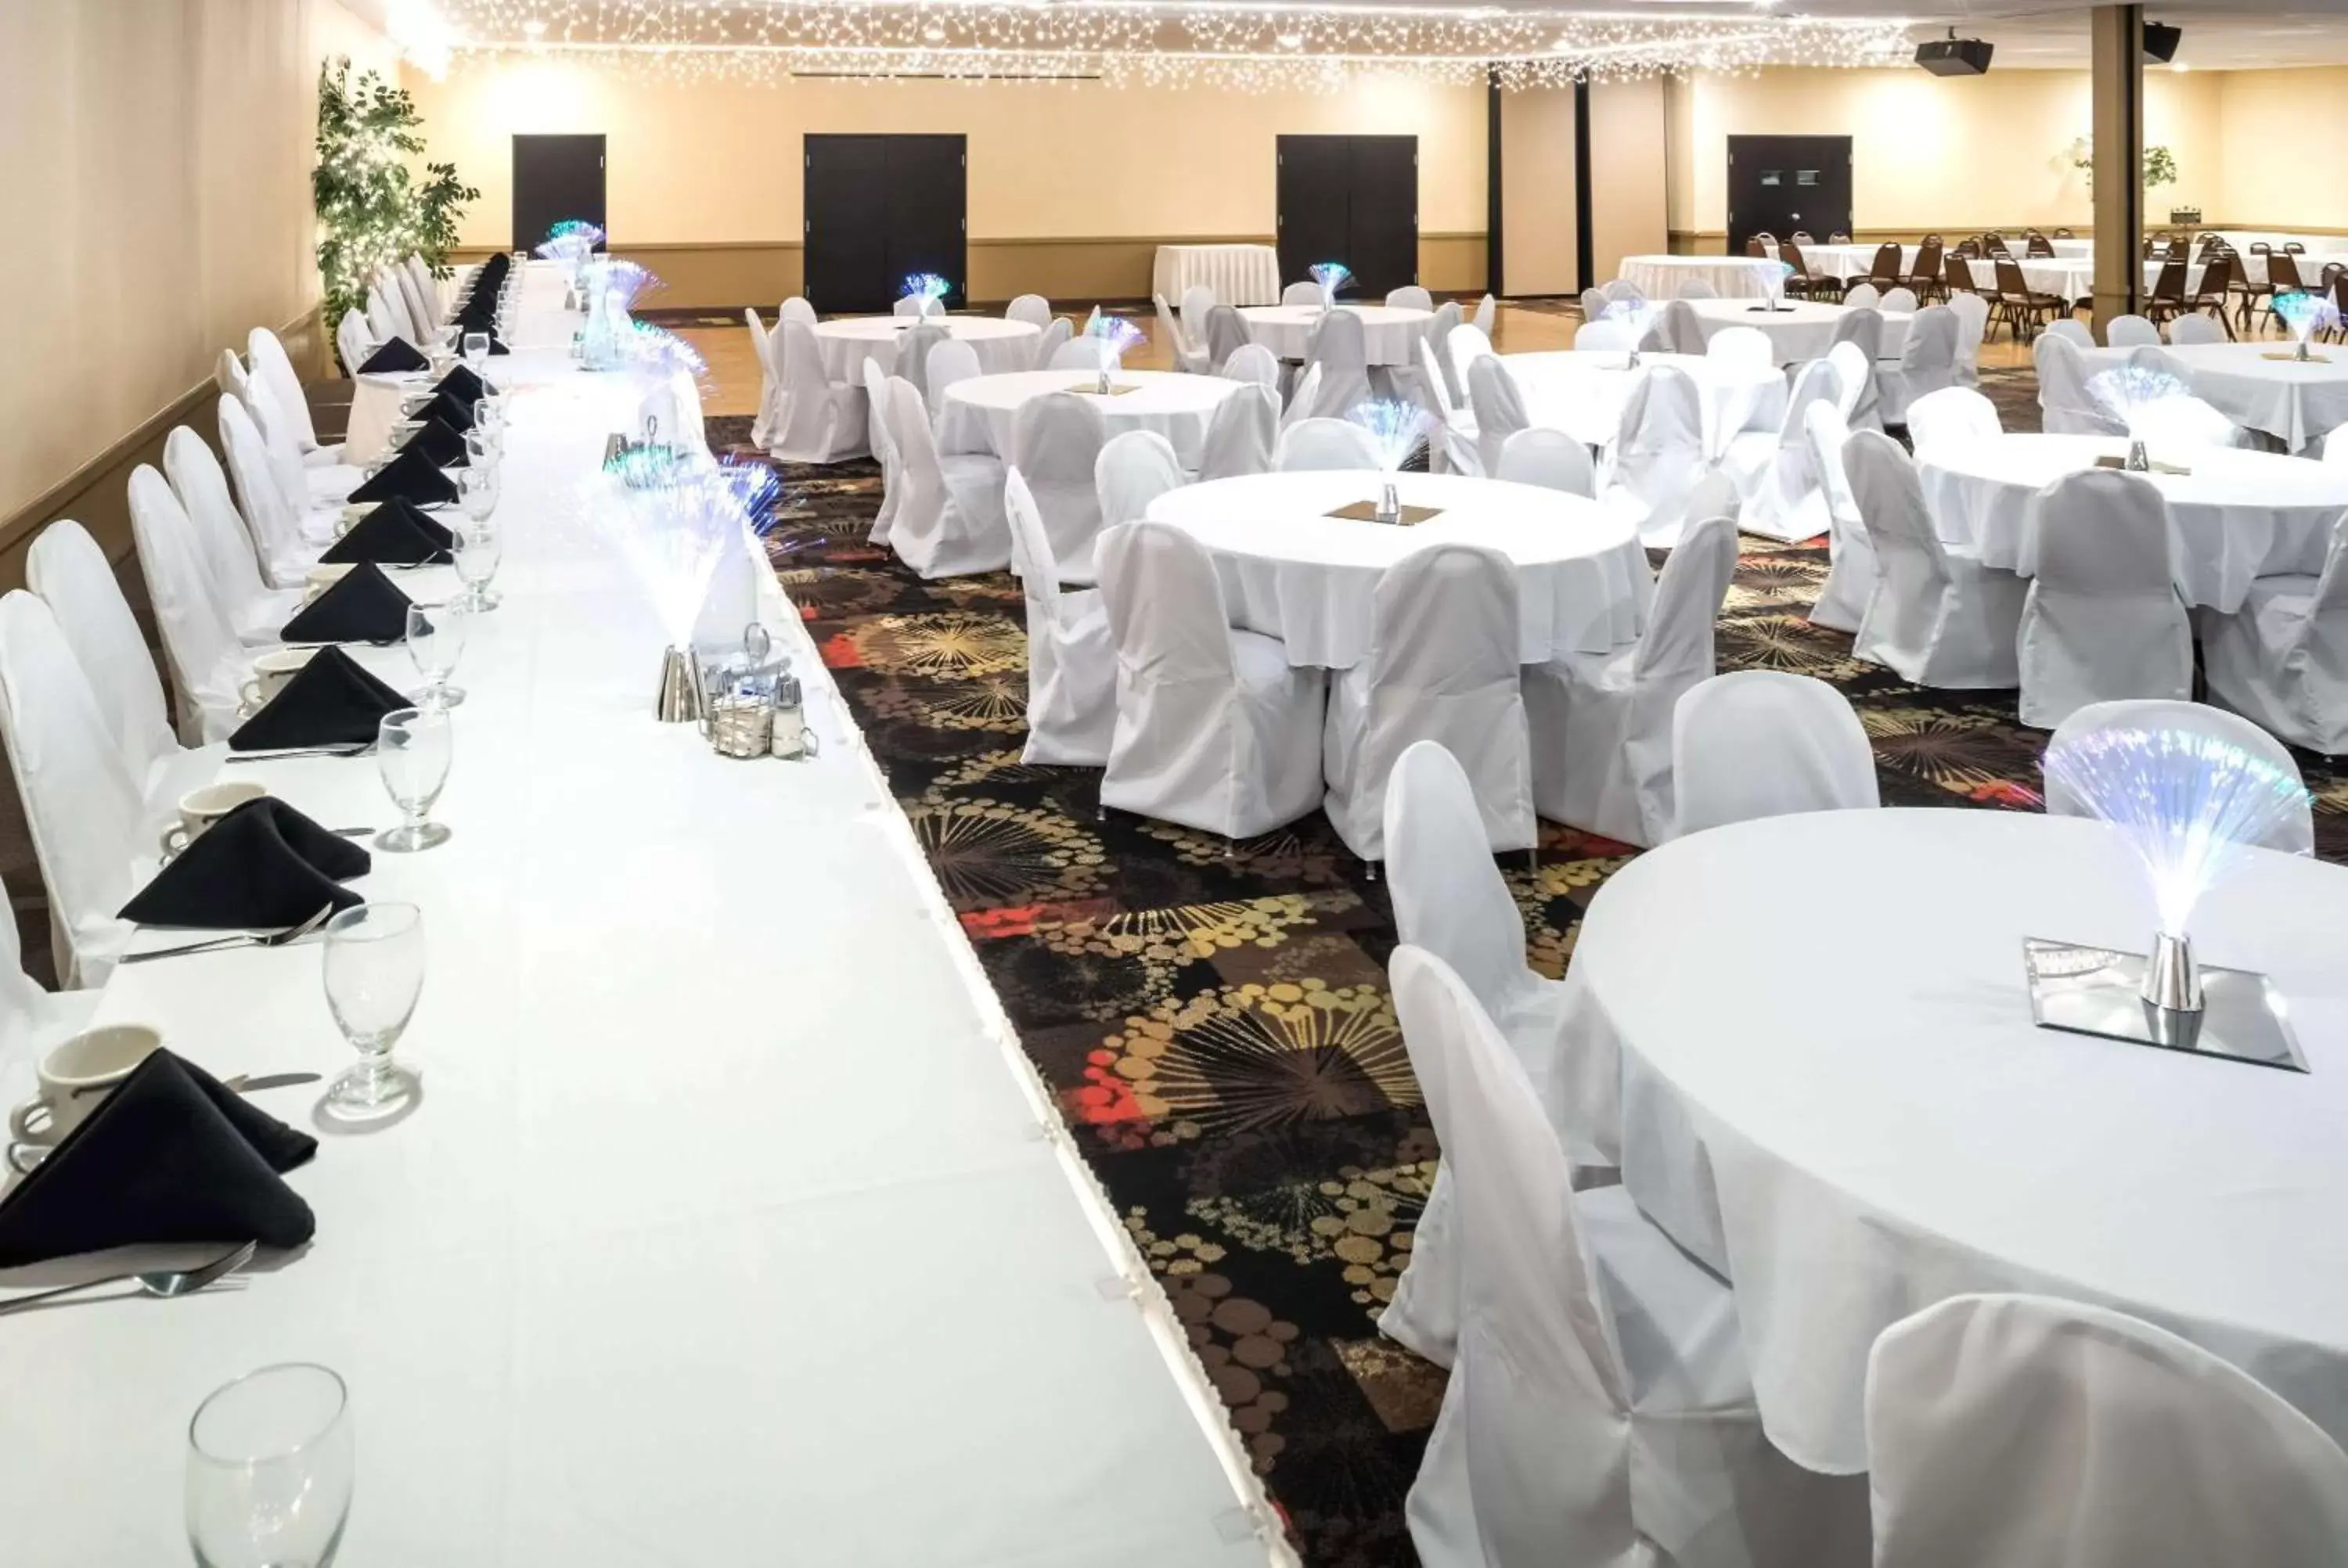 On site, Banquet Facilities in Ramada by Wyndham Grand Forks